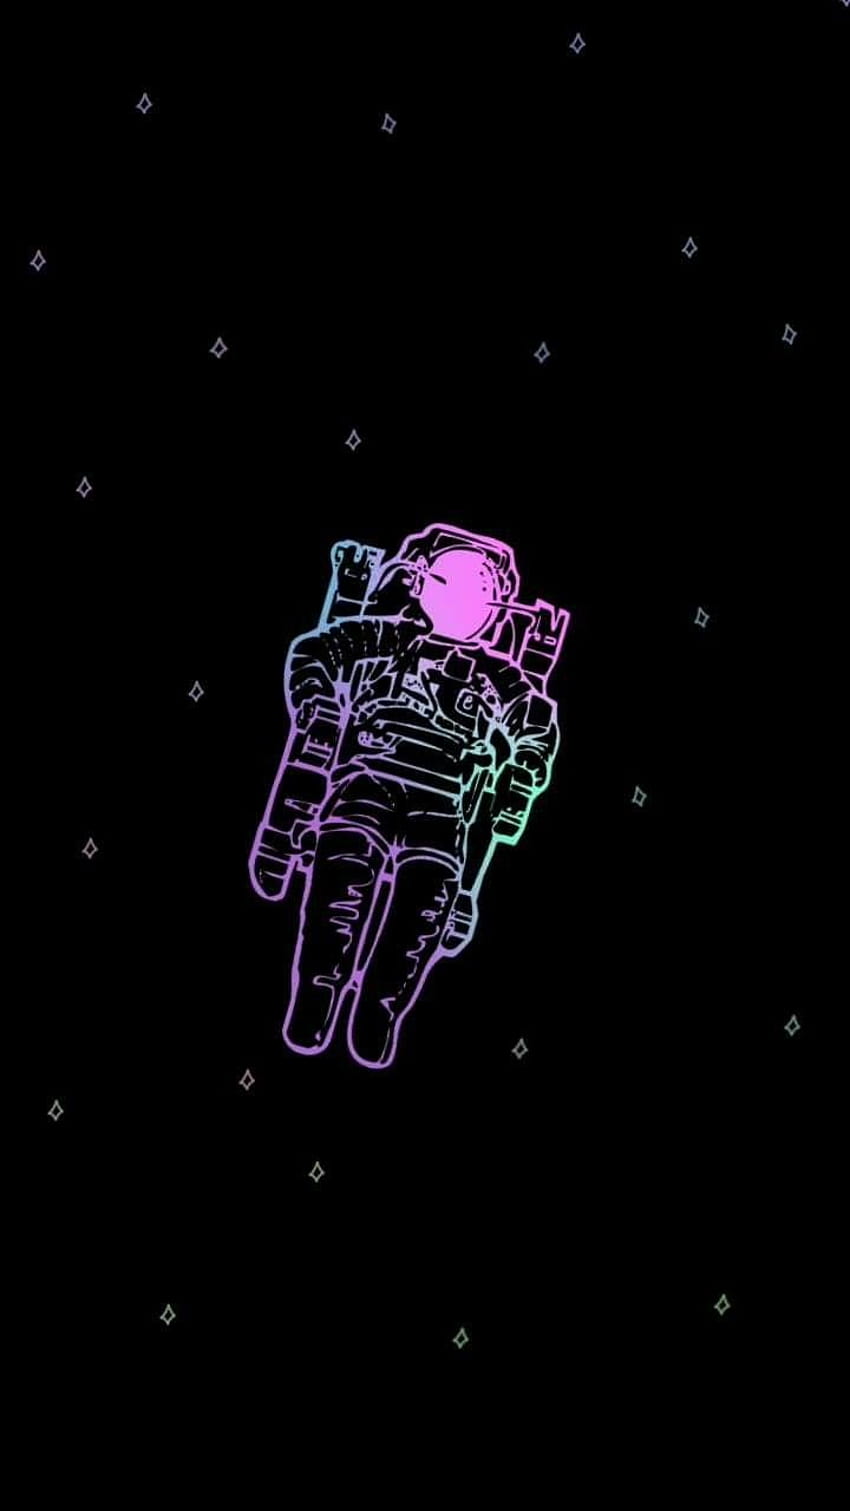 Astronaut in space with a black background - Astronaut